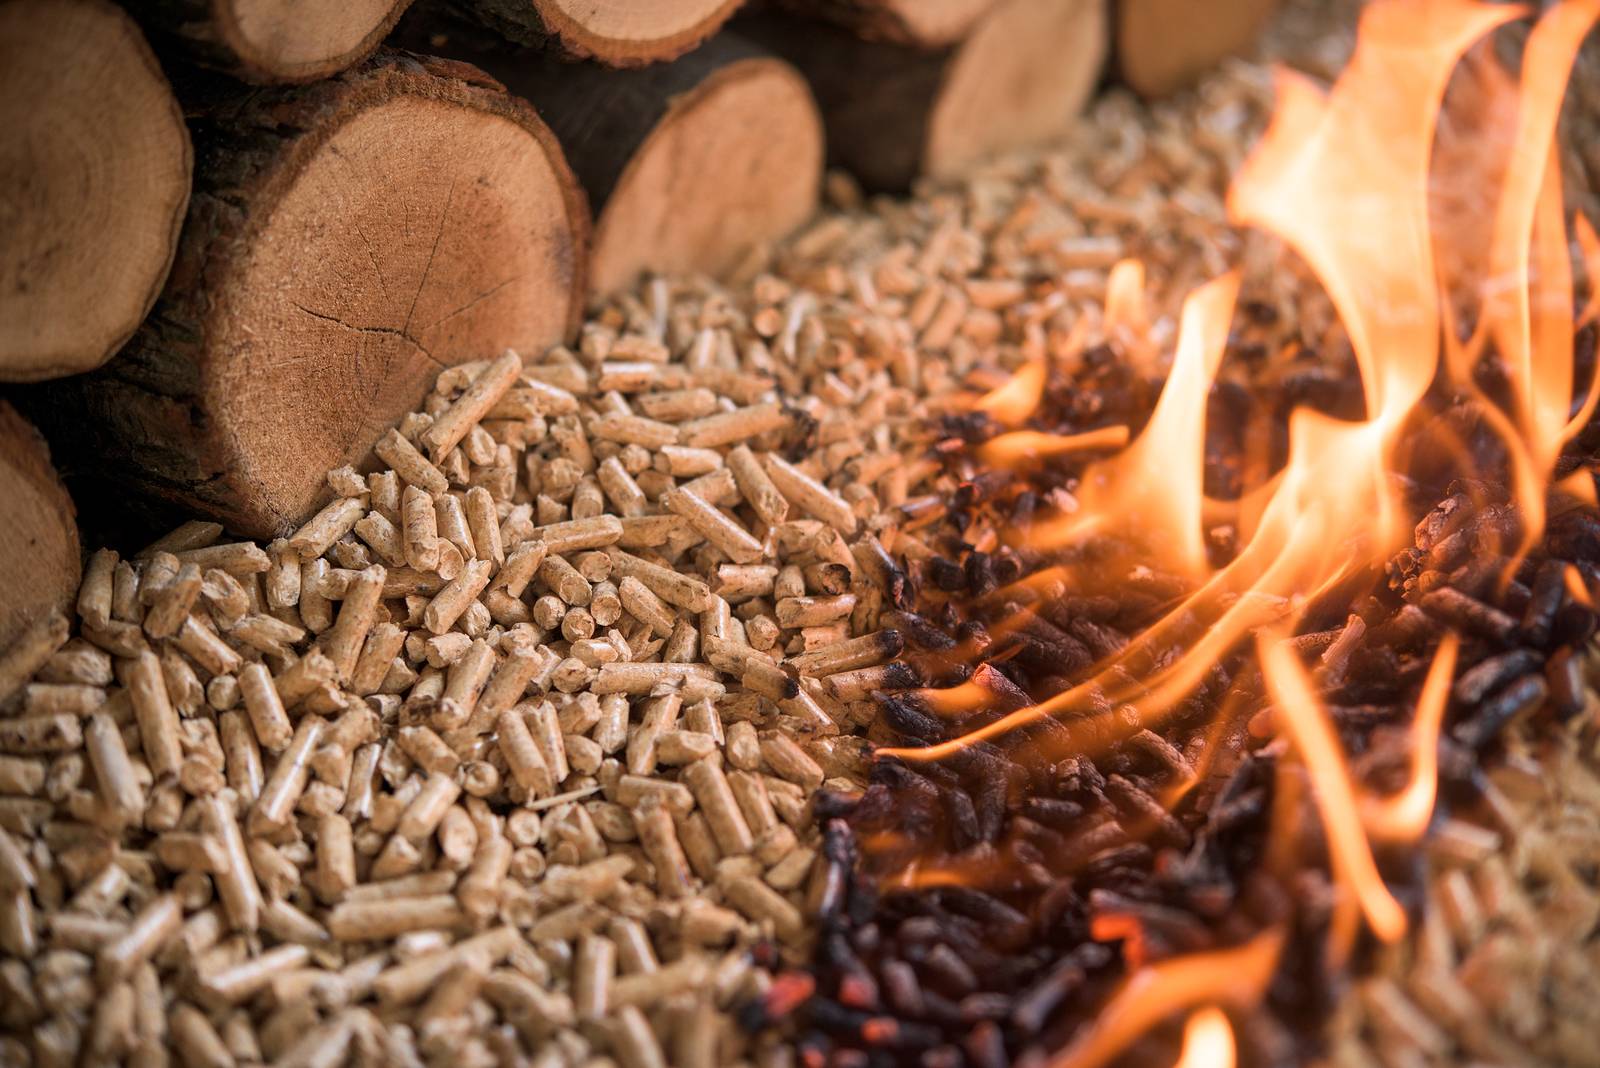 Poland increased production and use of wood pellets